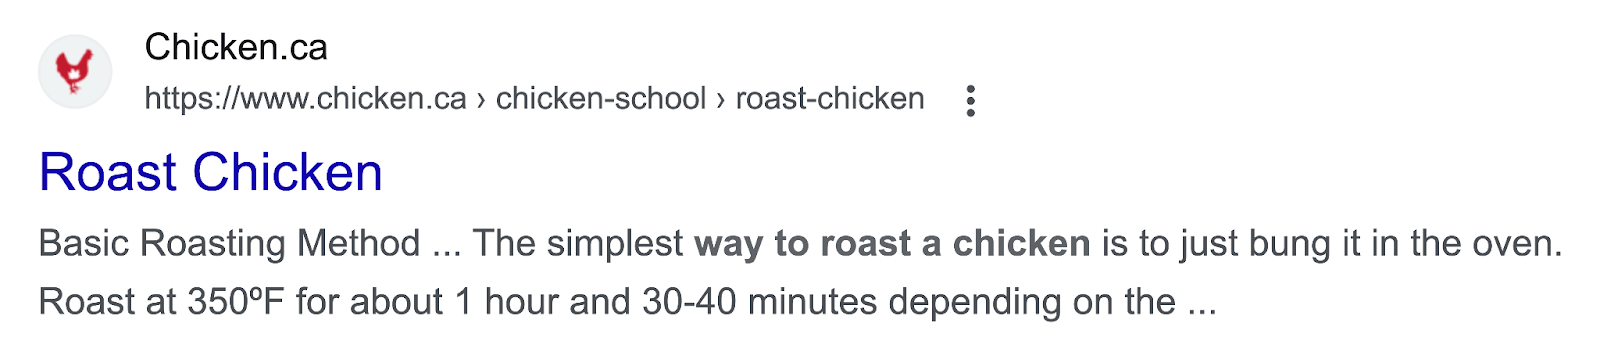 typical search listing for roast chicken